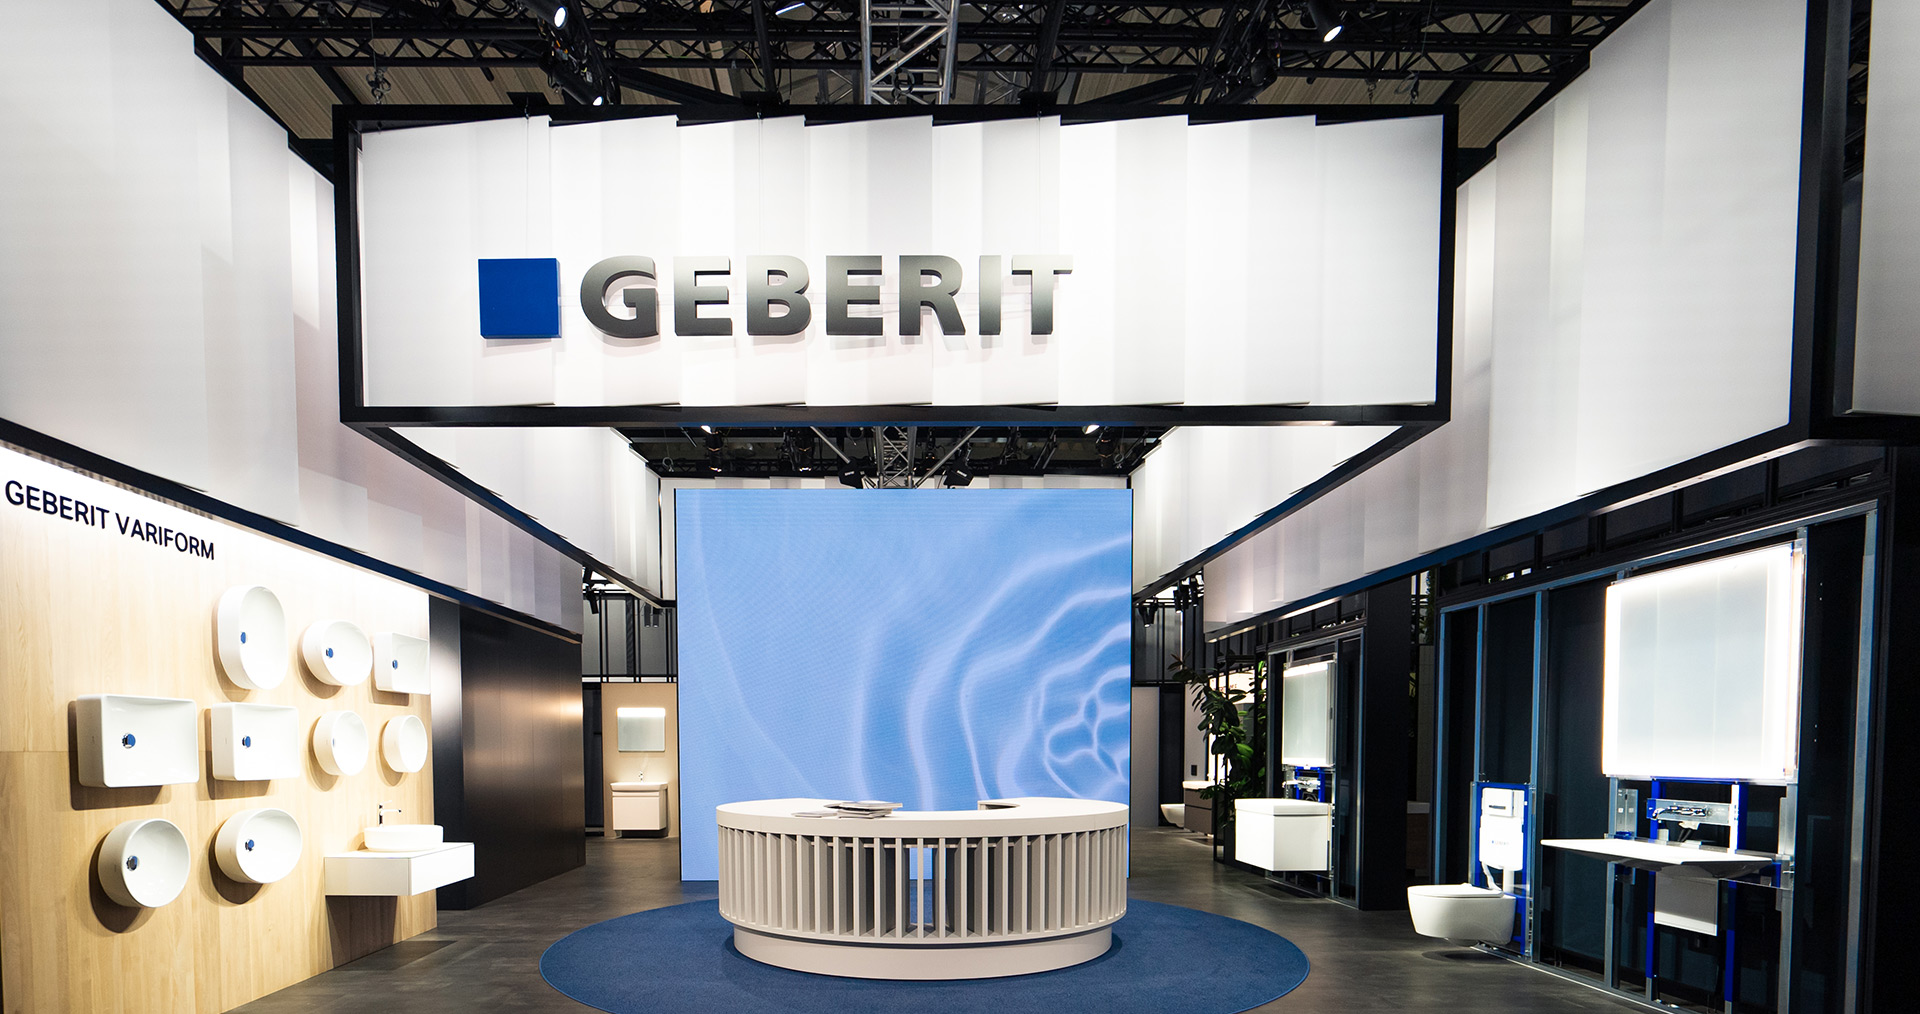 Everything online – cancelled trade fairs are replaced by the Geberit Innovation Days.